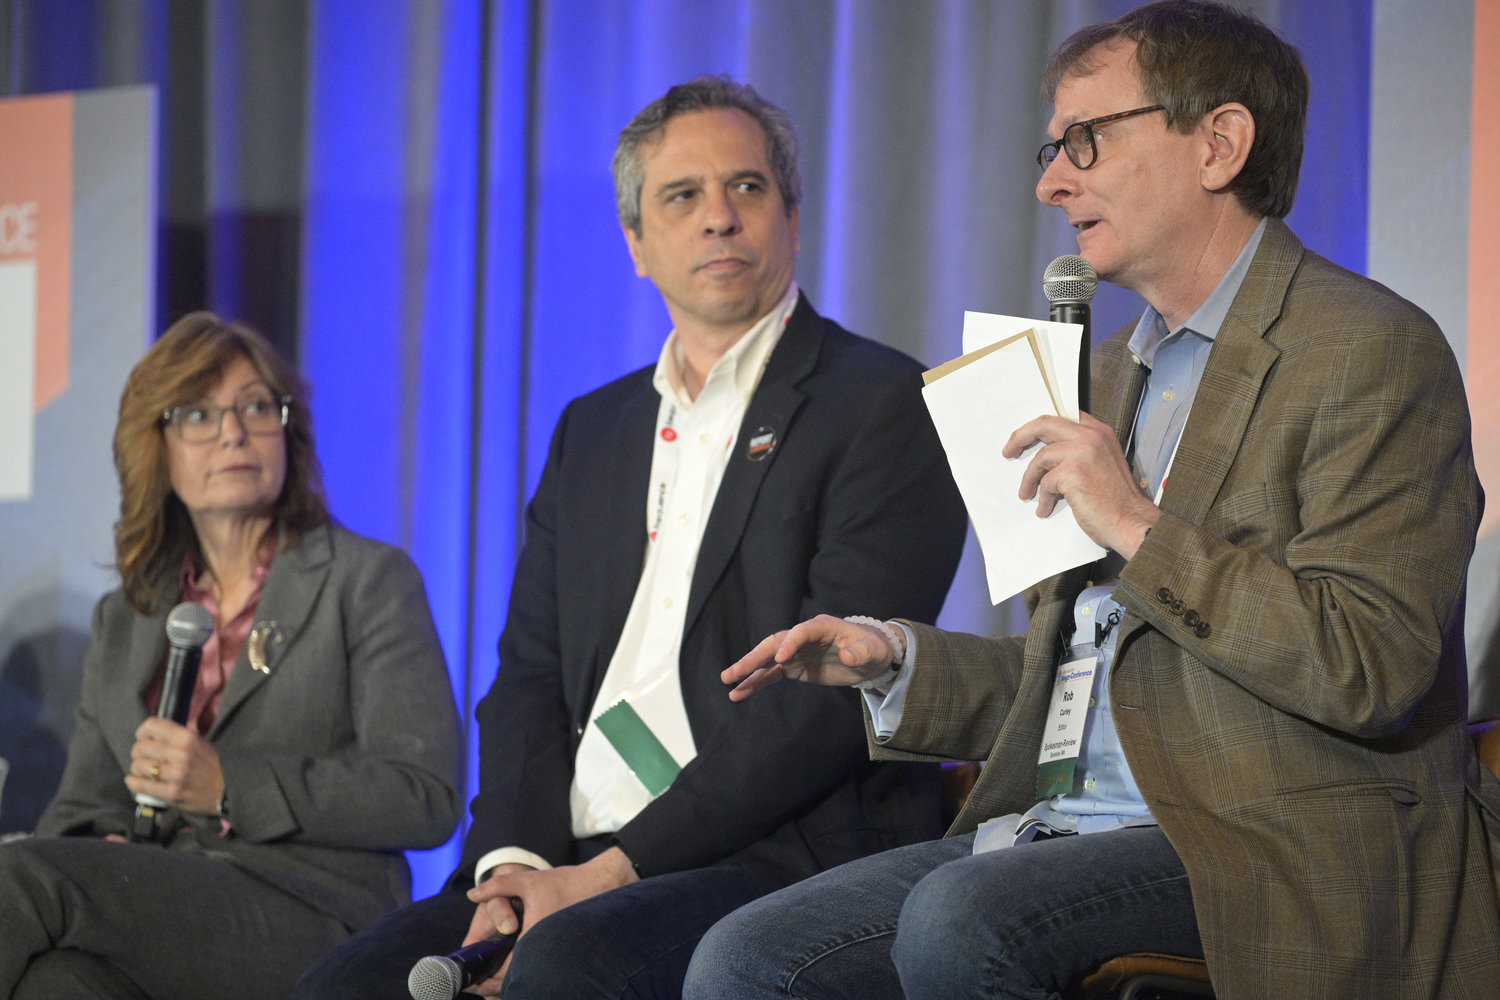 Julie Anderson, executive editor of the Orlando Sentinel and Sun-Sentinel; Steve Waldman, president and co-founder of Report for America; and Rob Curley, editor of The Spokesman-Review, Spokane, Washington. (Photo by Phelan M. Ebenhack)